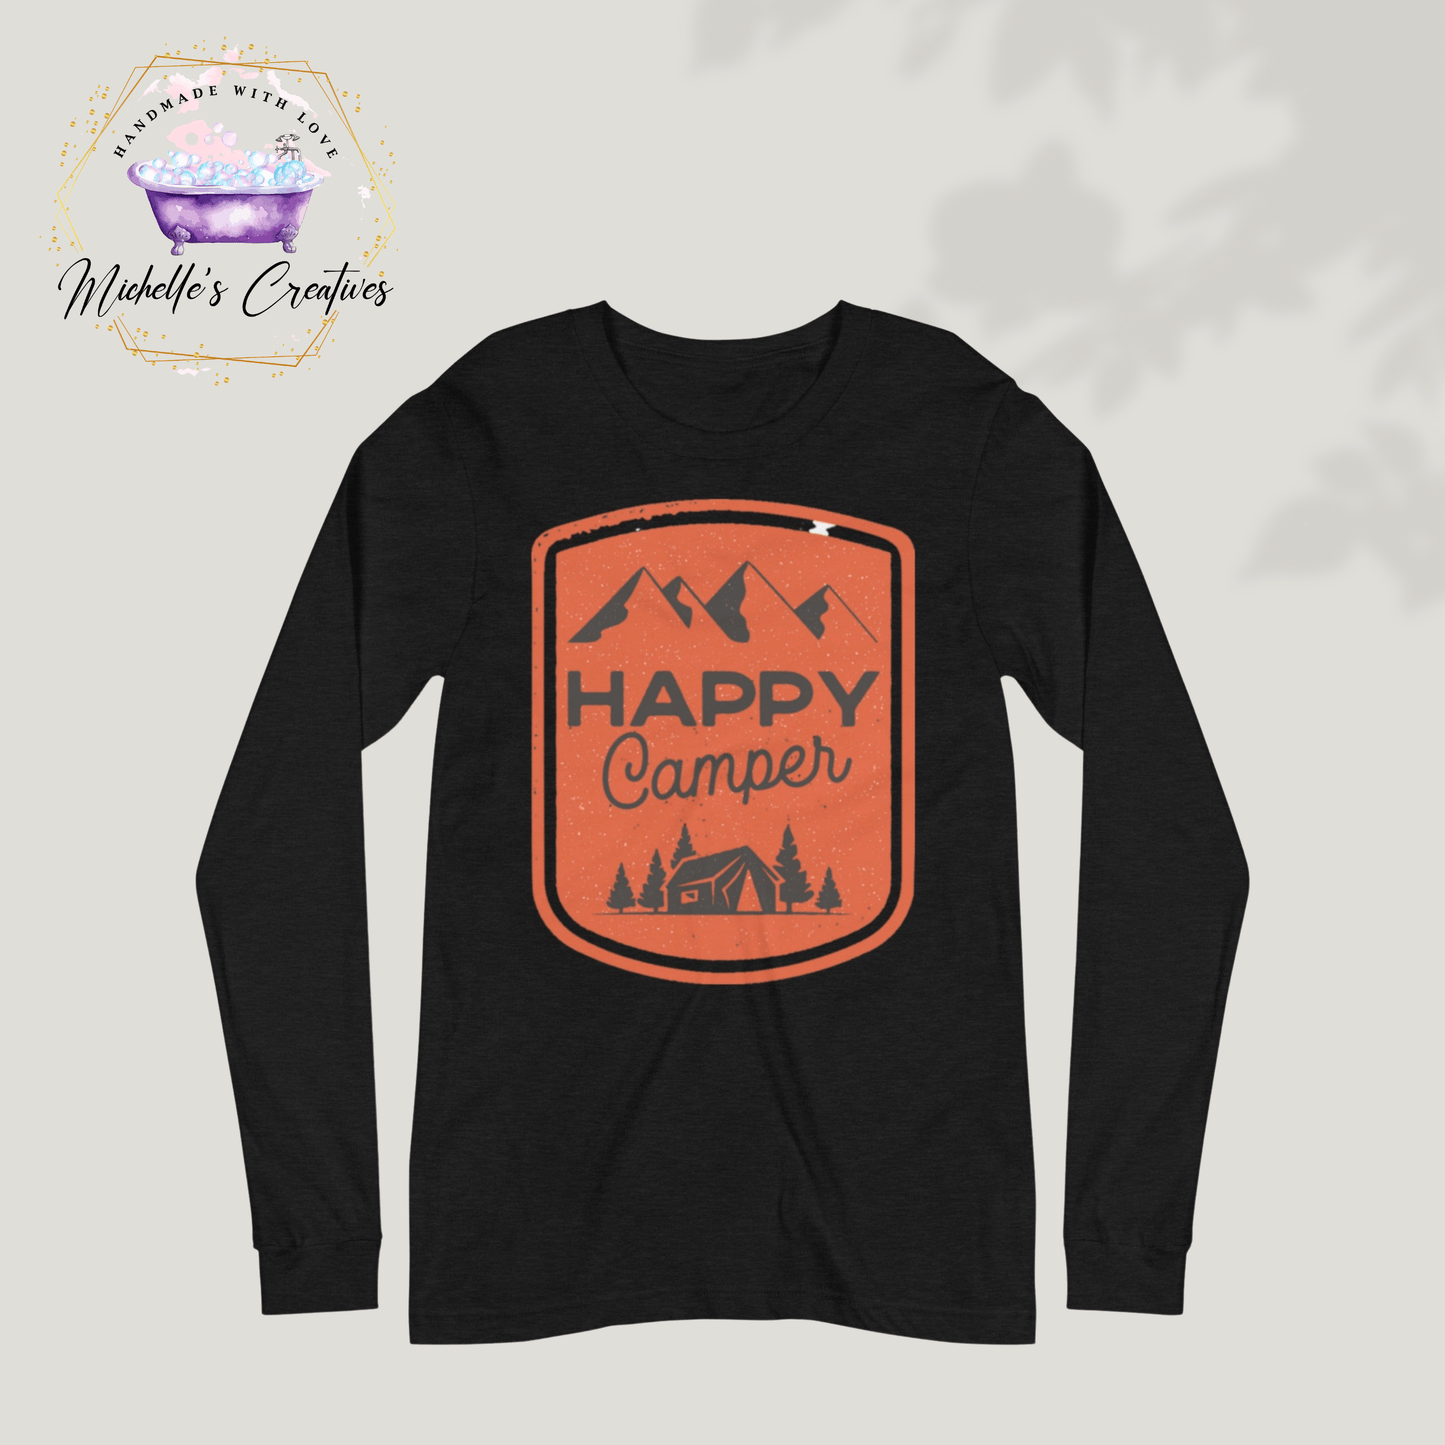 Michelle's Creatives XS Happy Camper Unisex Long Sleeve Tee 1889040_12932